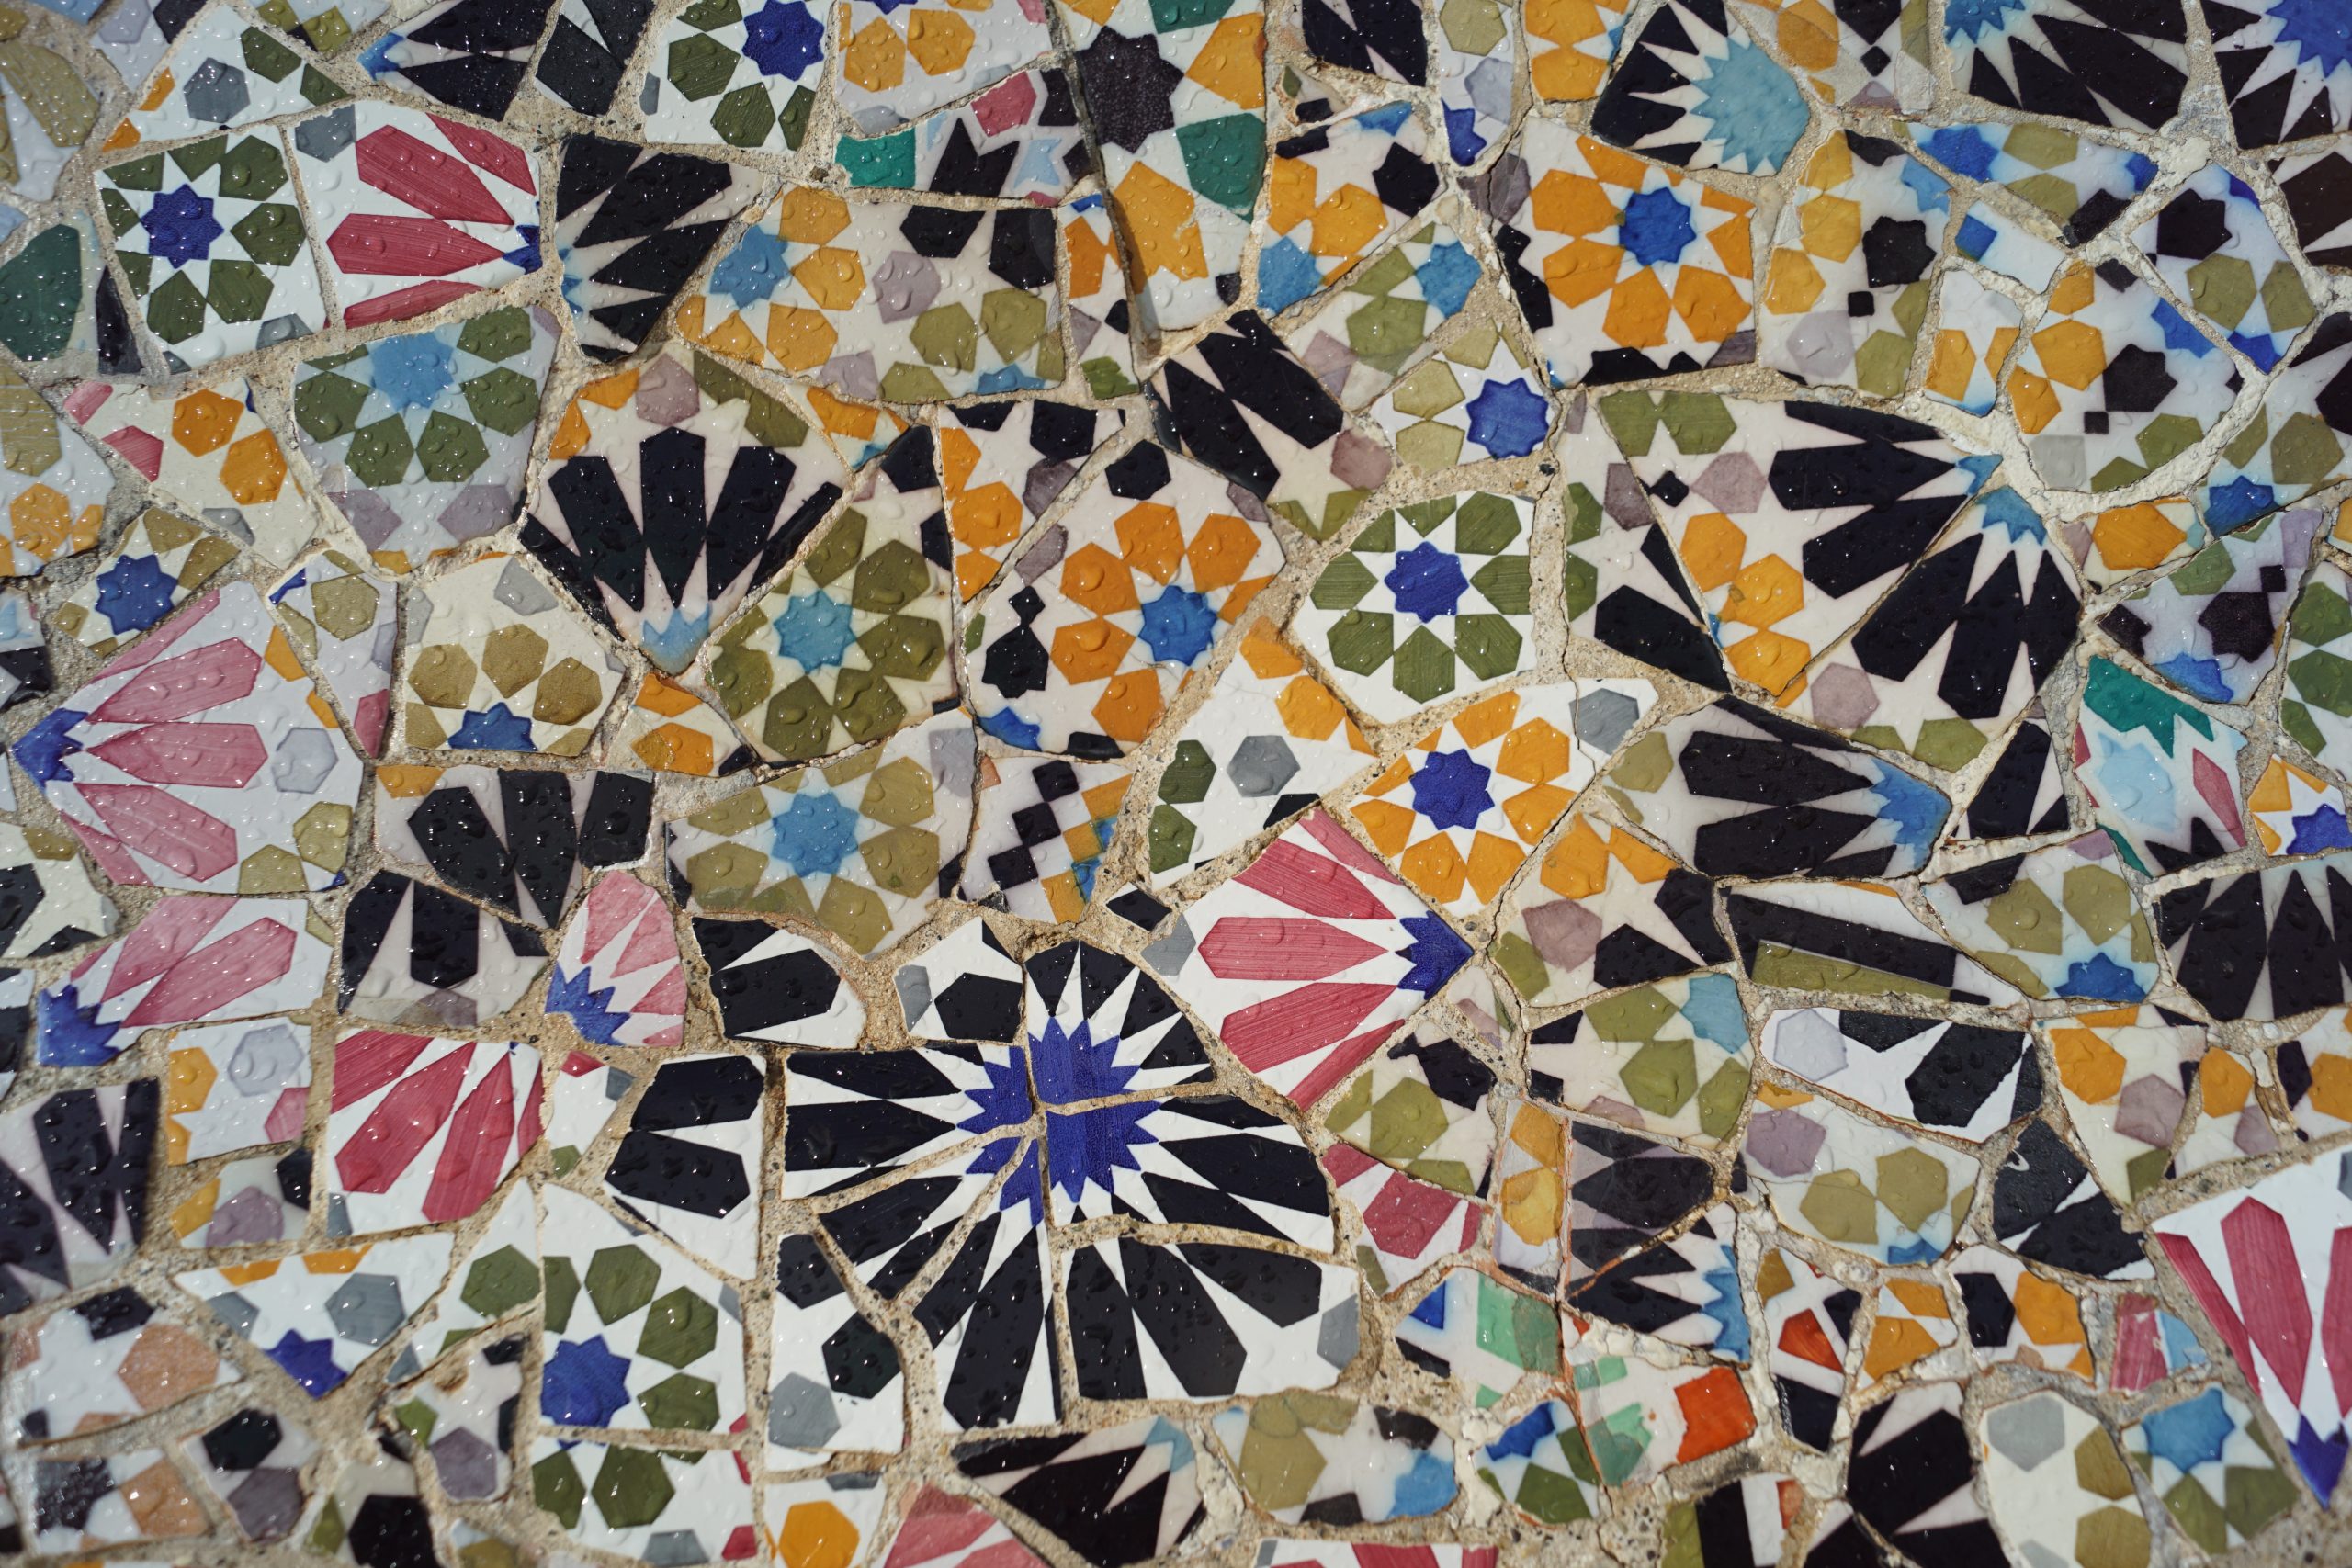 The image depicts a mosaic made of differently colored and patterned ceramic tiles